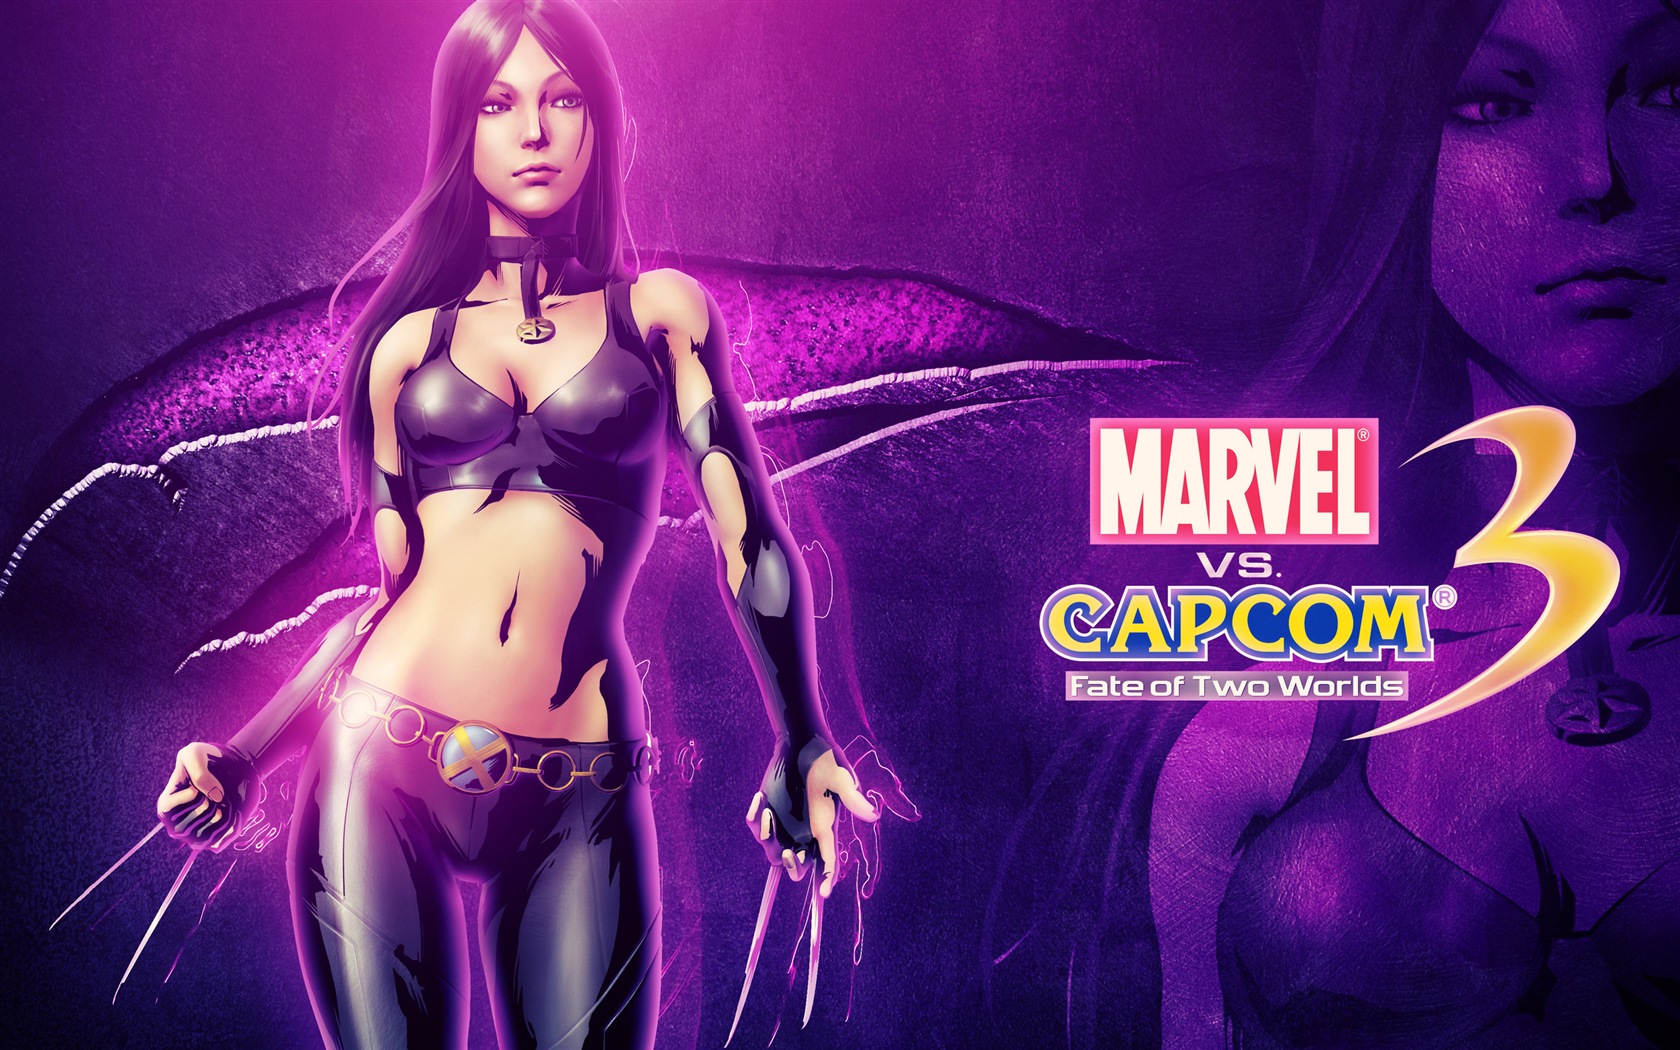 Marvel VS. Capcom 3: Fate of Two Worlds HD game wallpapers #10 - 1680x1050